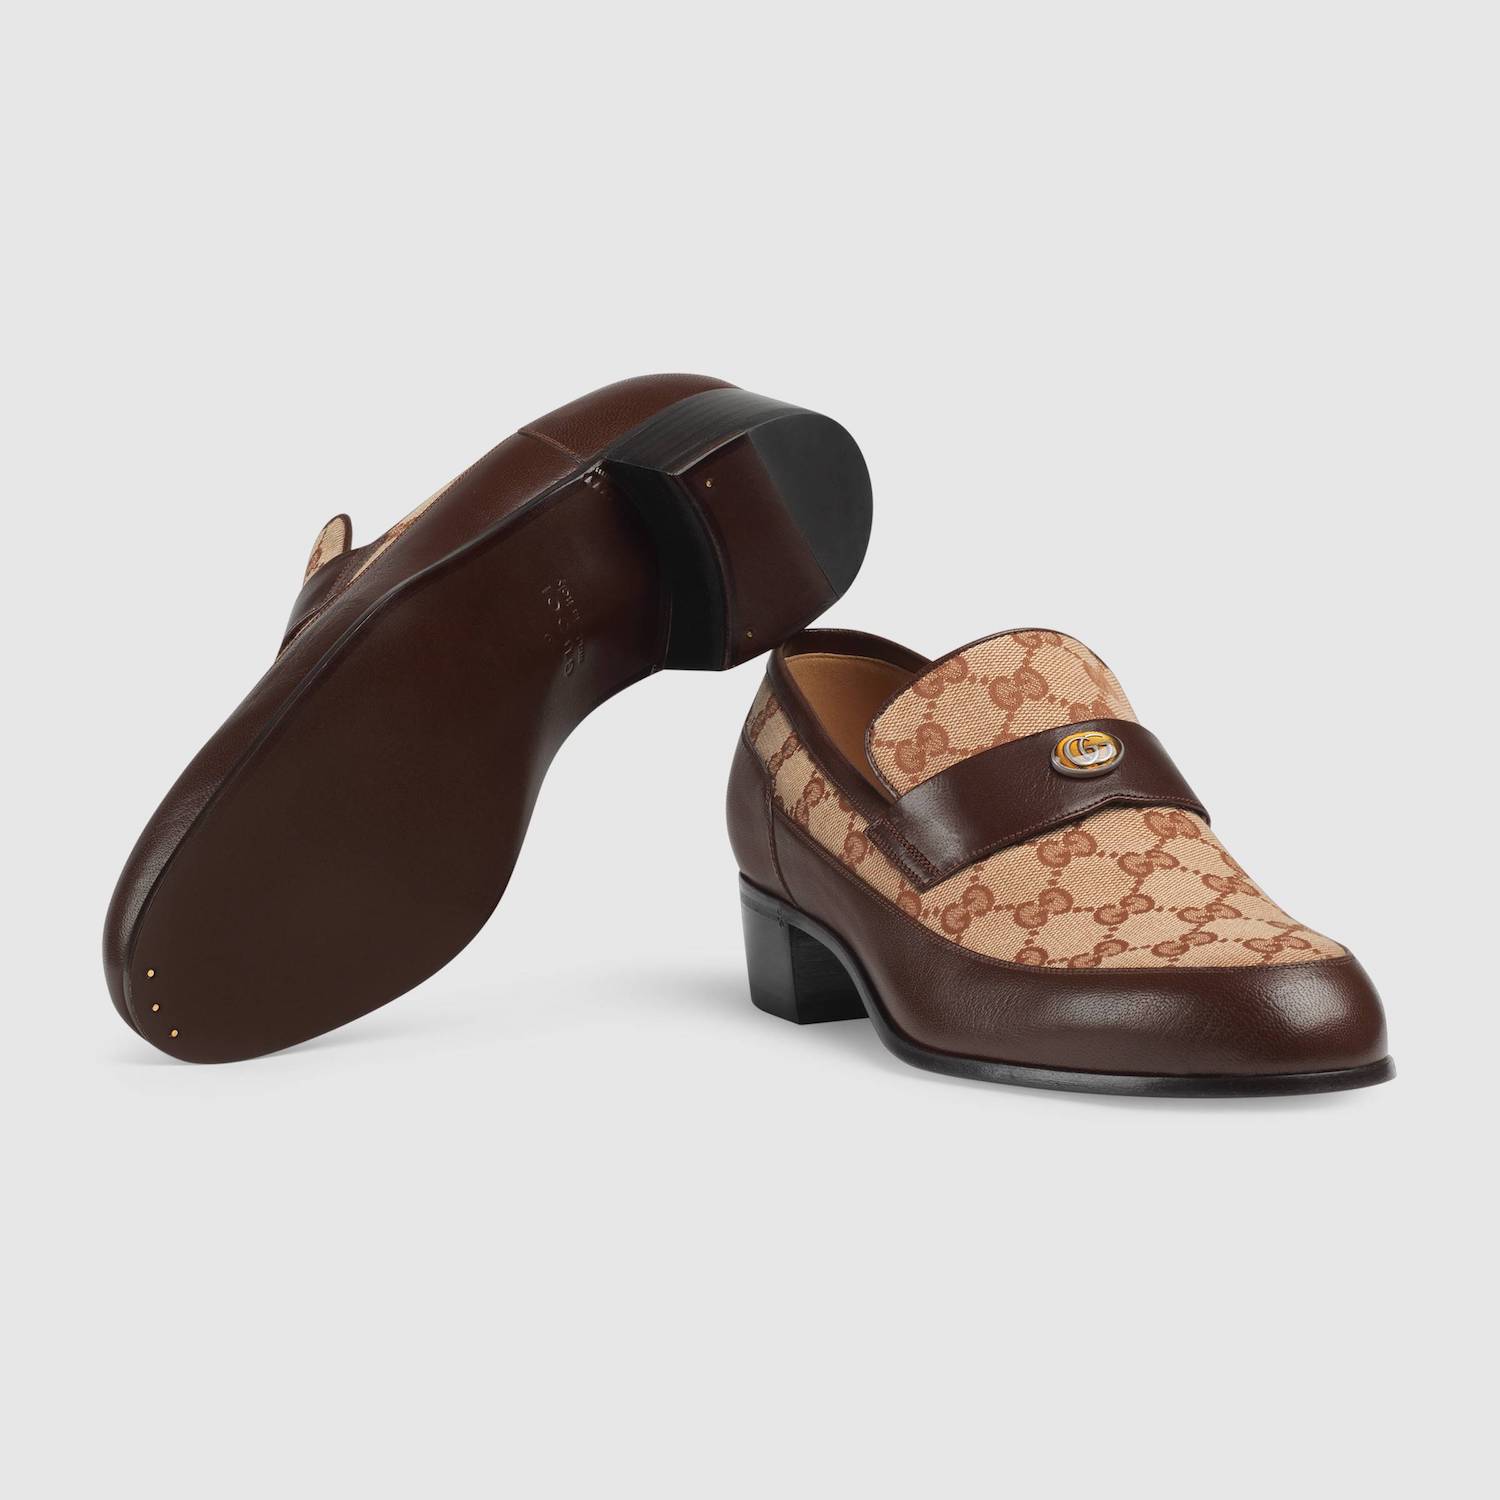 New In: Gucci Team Motif Loafer